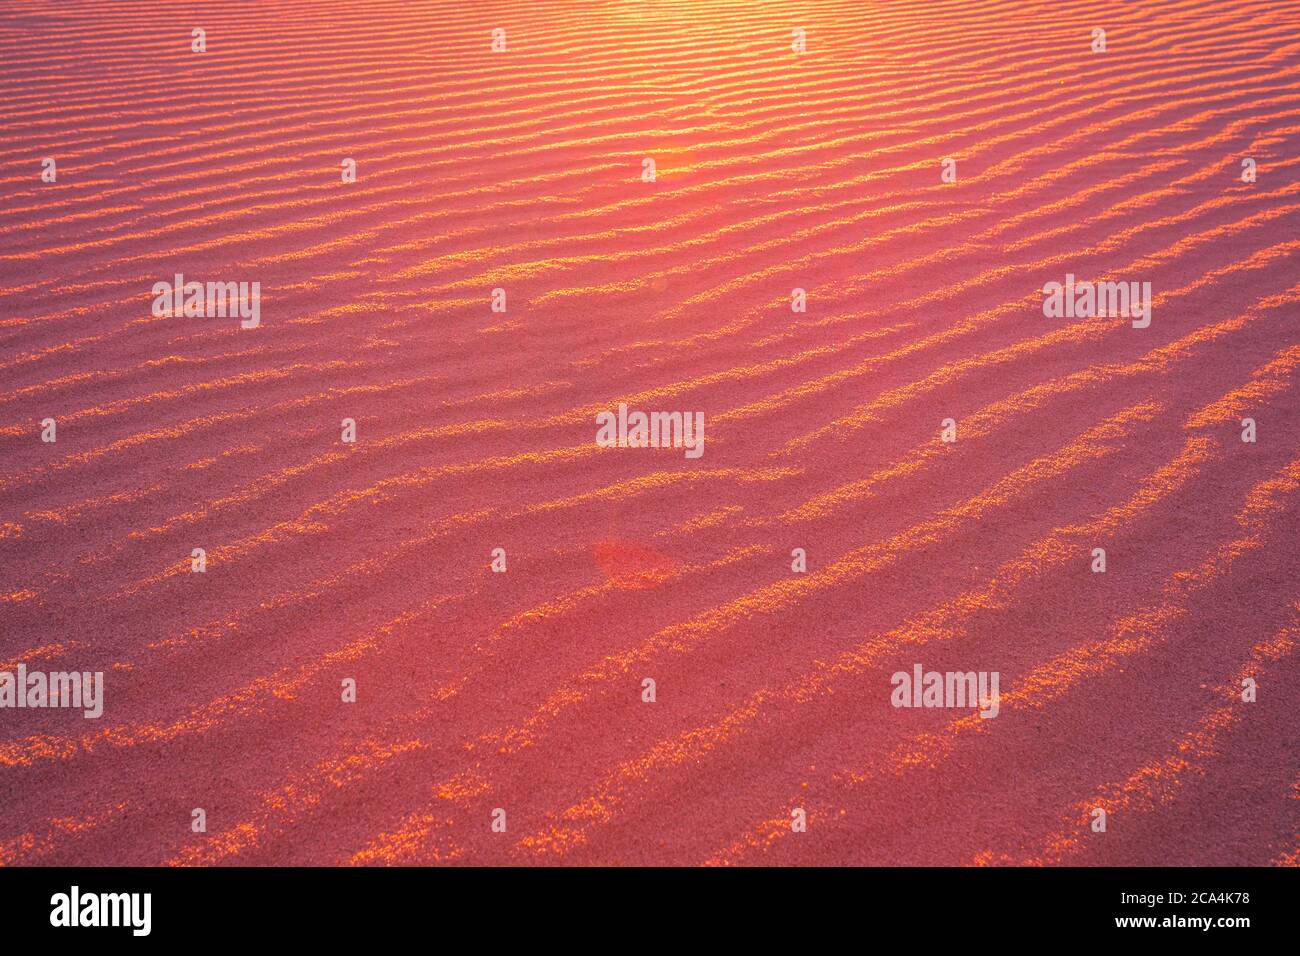 Sand pattern in the warm evening sunlight Stock Photo